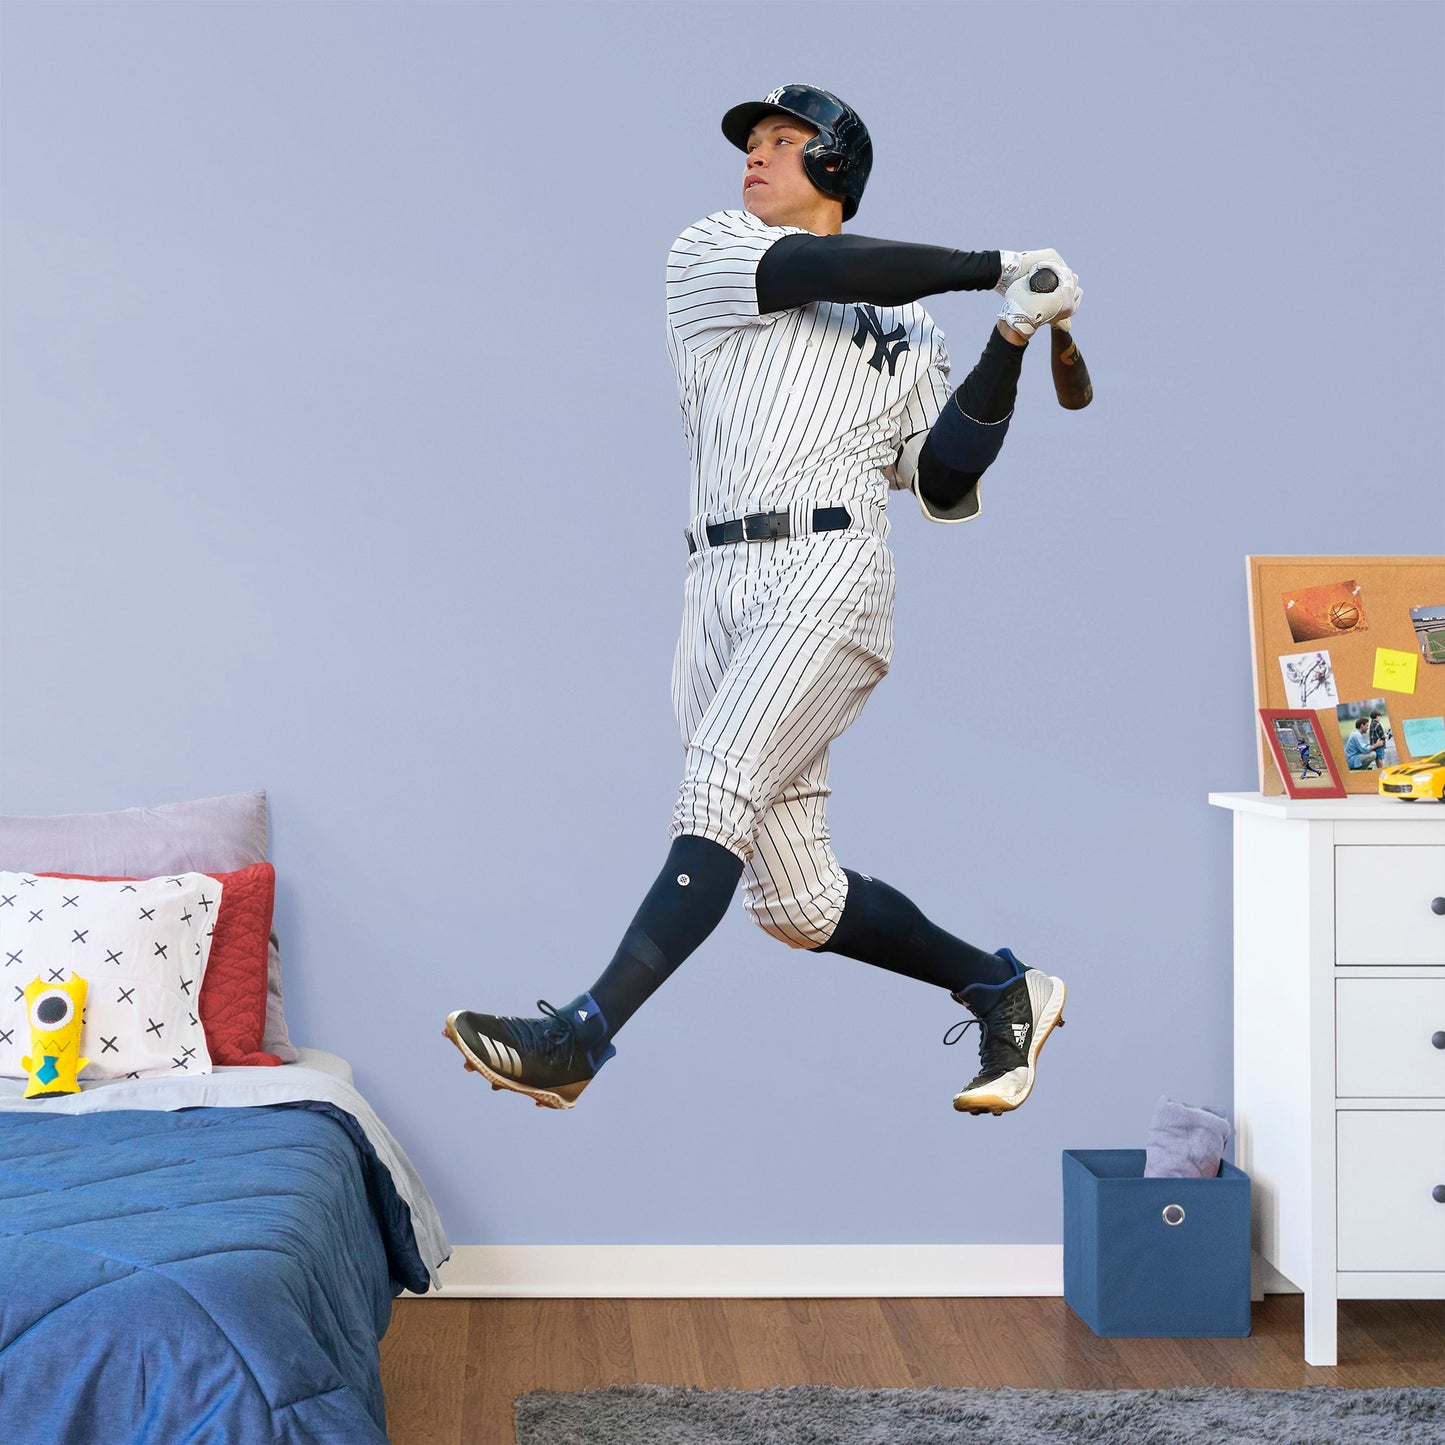 Life-Size Athlete + 12 Decals (49"W x 78"H) Hit a home run with Bleacher Creatures and other fans of the Yankees' navy and white pinstripes with this officially licensed MBL wall decal featuring outfielder Aaron Judge. Easy to apply and remove, this high-quality decal displays the full frame of the former Fresno State Bulldog and the American League's 2017 Rookie of the Year.